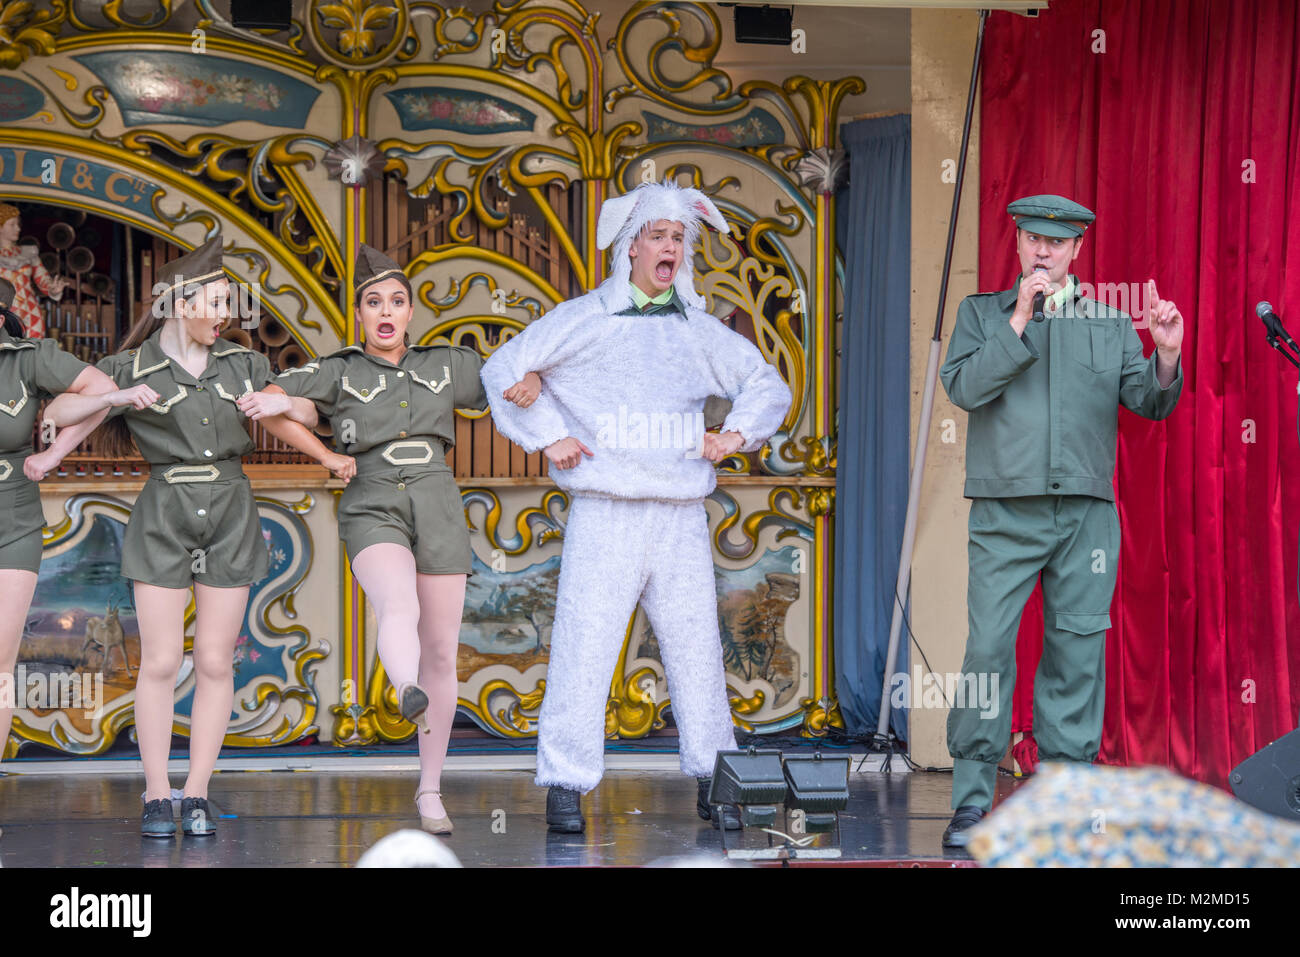 Female dancers in military attire link arms with male dancer in sheep costume to do the cancan while a man sings, Masham, North Yorkshire, UK Stock Photo